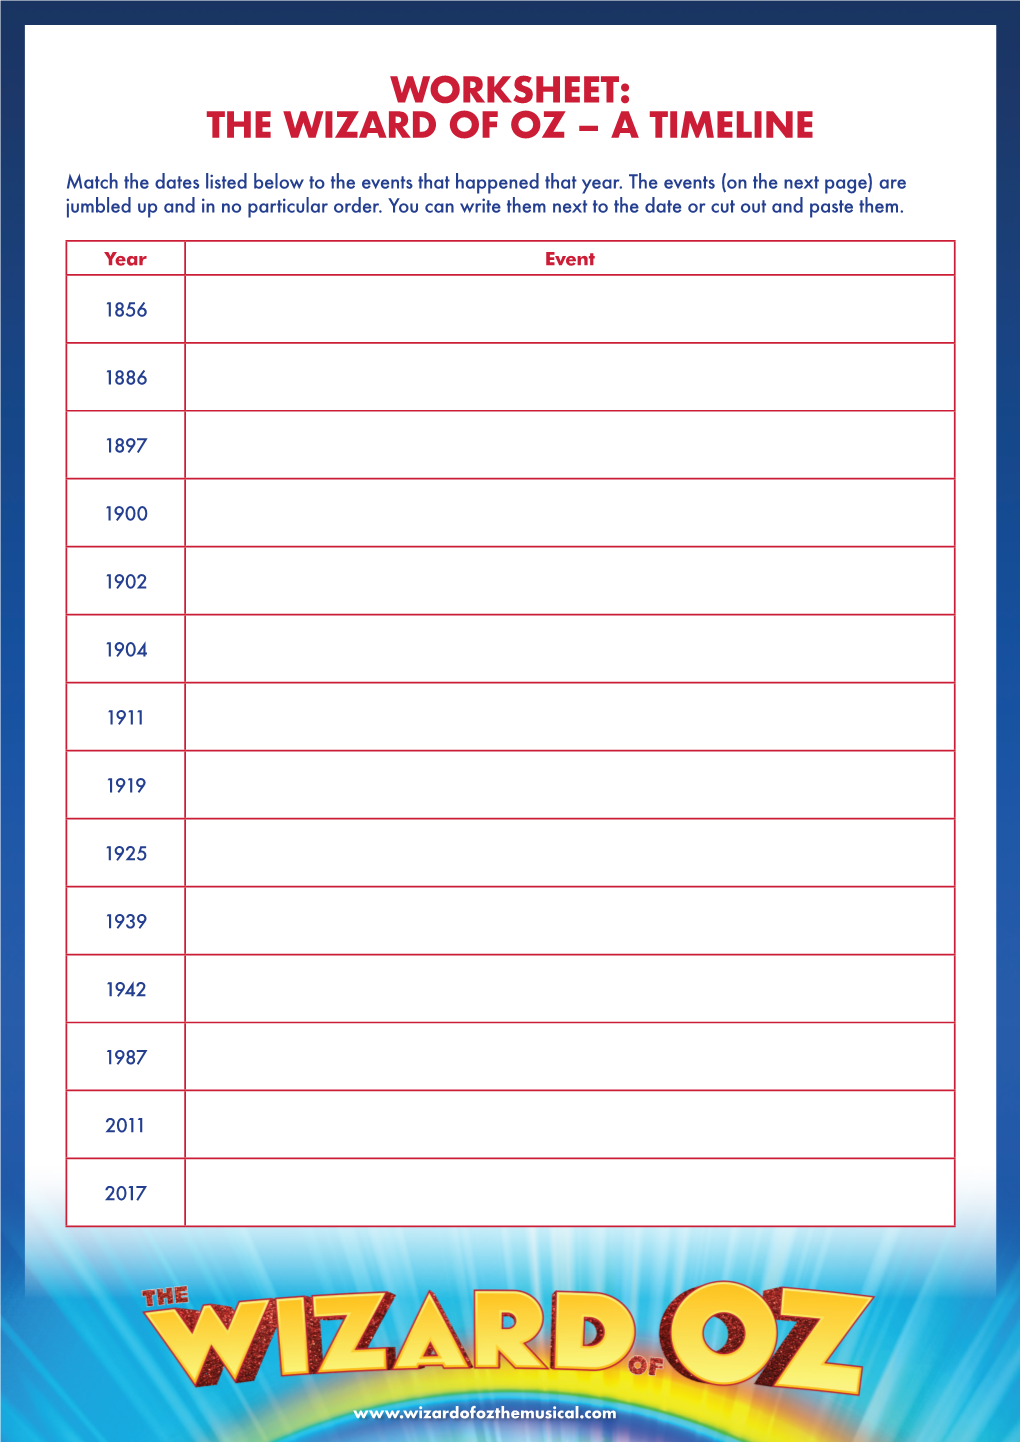 Worksheet: the Wizard of Oz – a Timeline